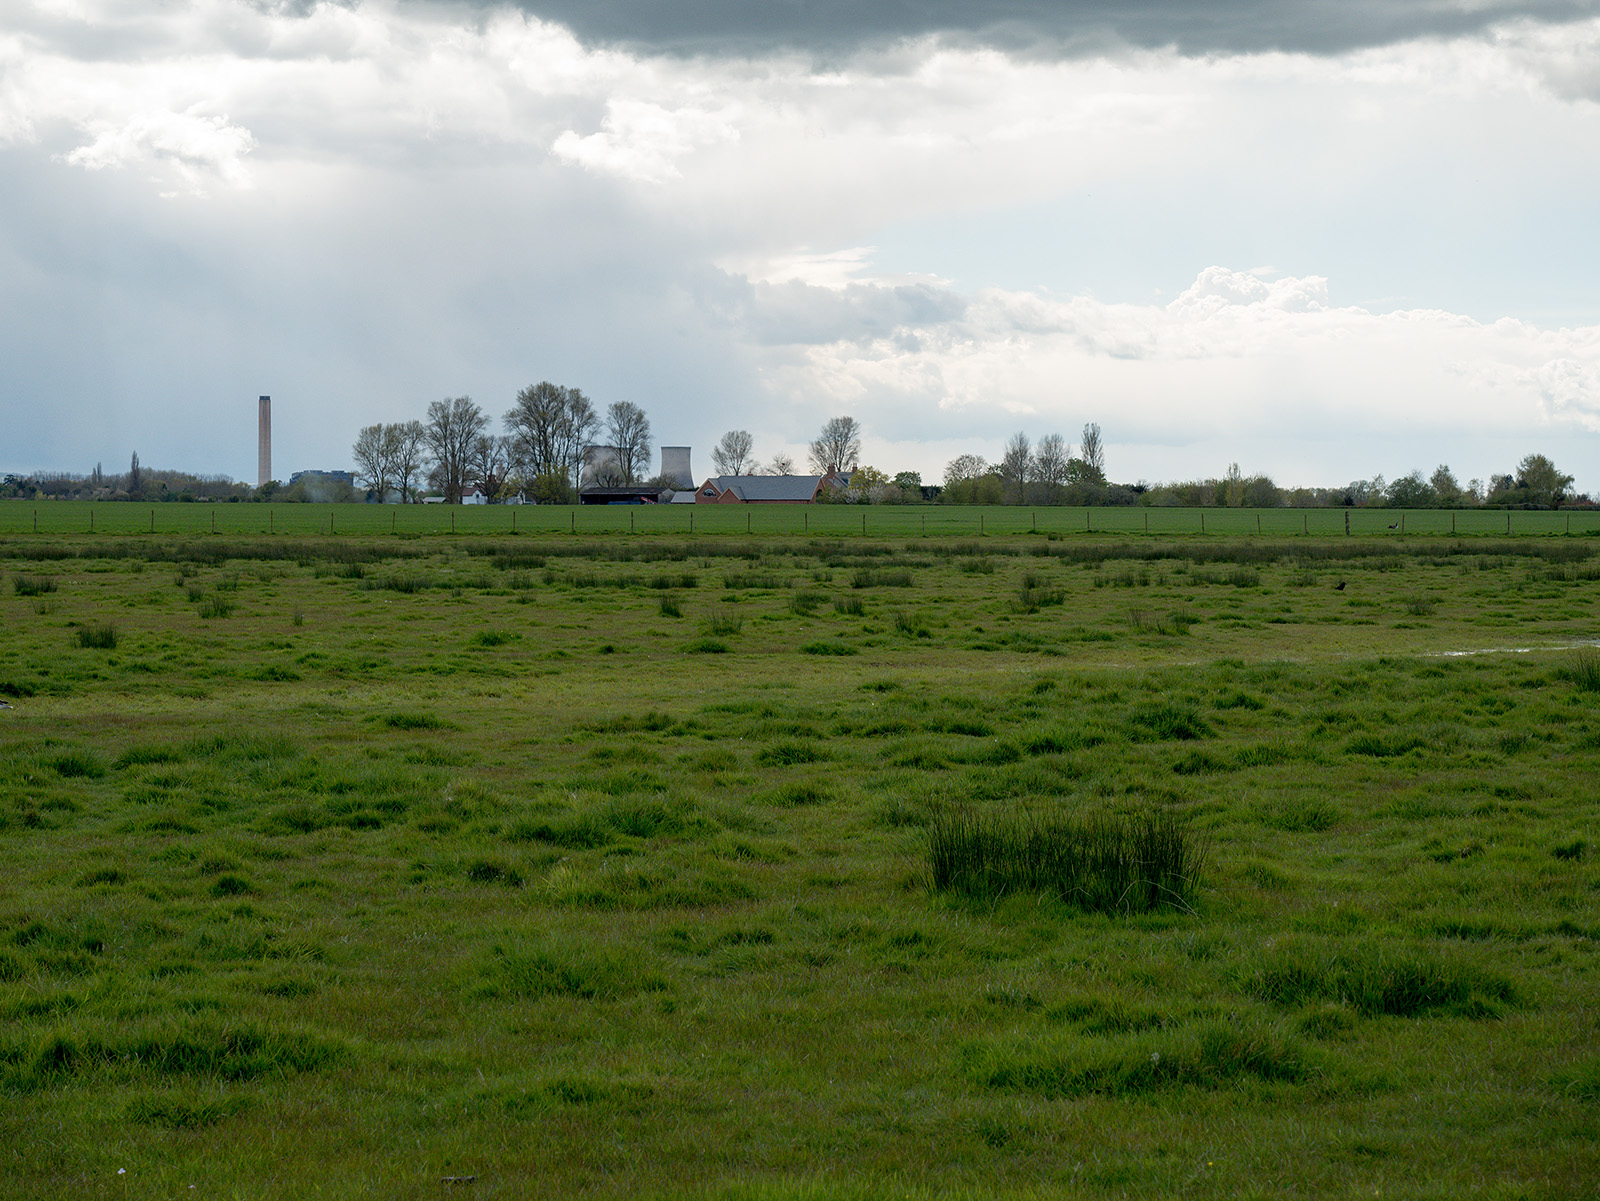 Didcot power station comes into view again - a common feature of this walk